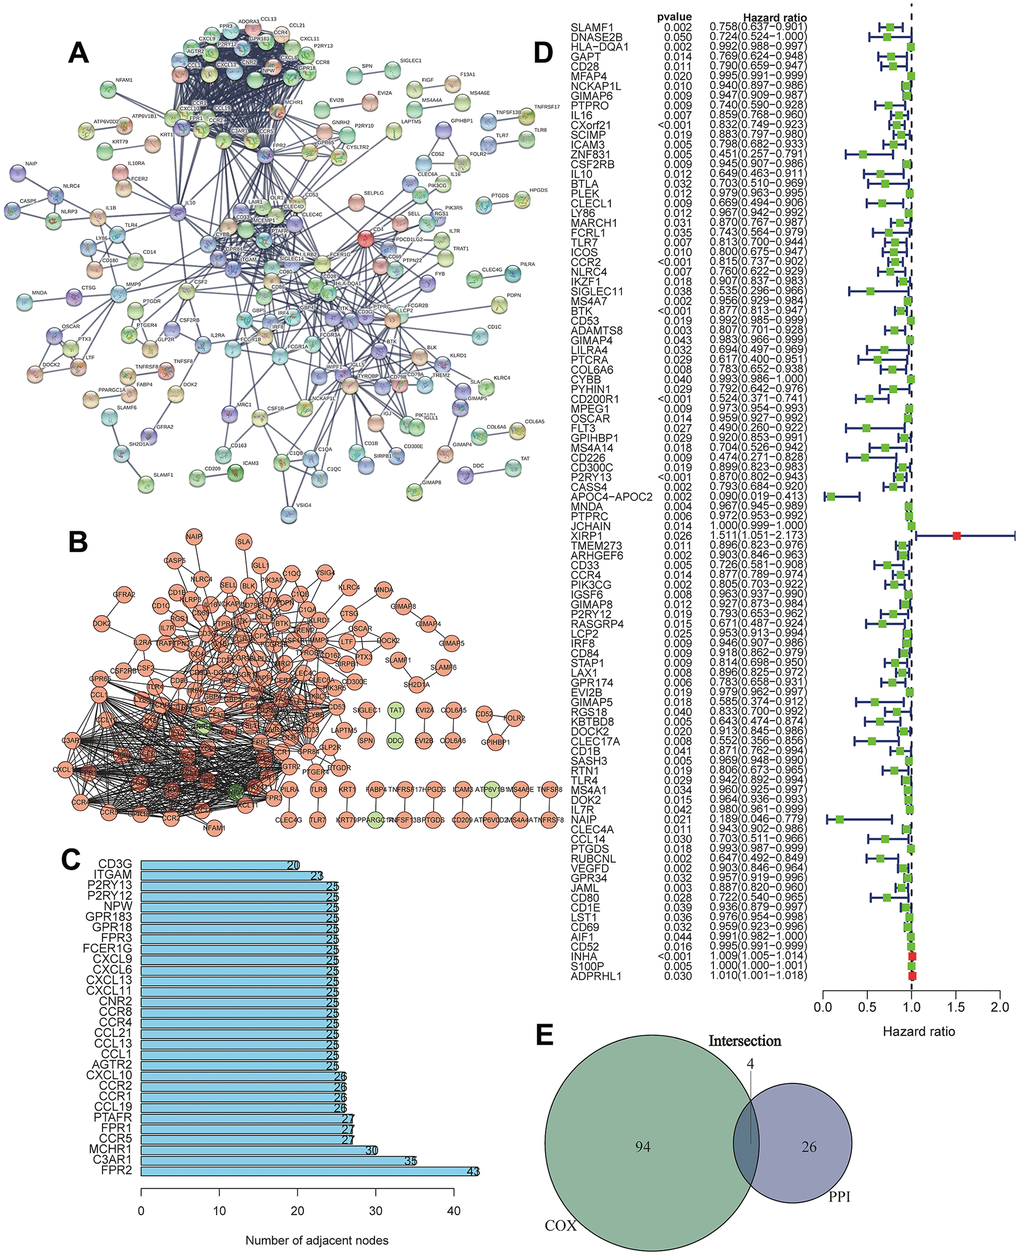 Screening of differentially expressed genes based on protein-protein interaction (PPI) and Univariate Cox regression analysis. (A) PPI network of the aberrantly expressed genes based on STRING (interaction confidence value > 0.95). (B) Visualized PPI analysis of differentially expressed genes using Cytoscape. (C) Top 30 genes with maximum adjacent nodes. (D) Univariate Cox regression analysis for the aberrantly expressed genes. Genes with a p value less than 0.05 are shown in the forest plot. (E) Venn diagram of key genes in PPI and Cox regression analysis. Four TIIC-related genes (CCR2, CCR4, P2RY12, and P2RY13) were finally screened as prognostic factors of LUAD.